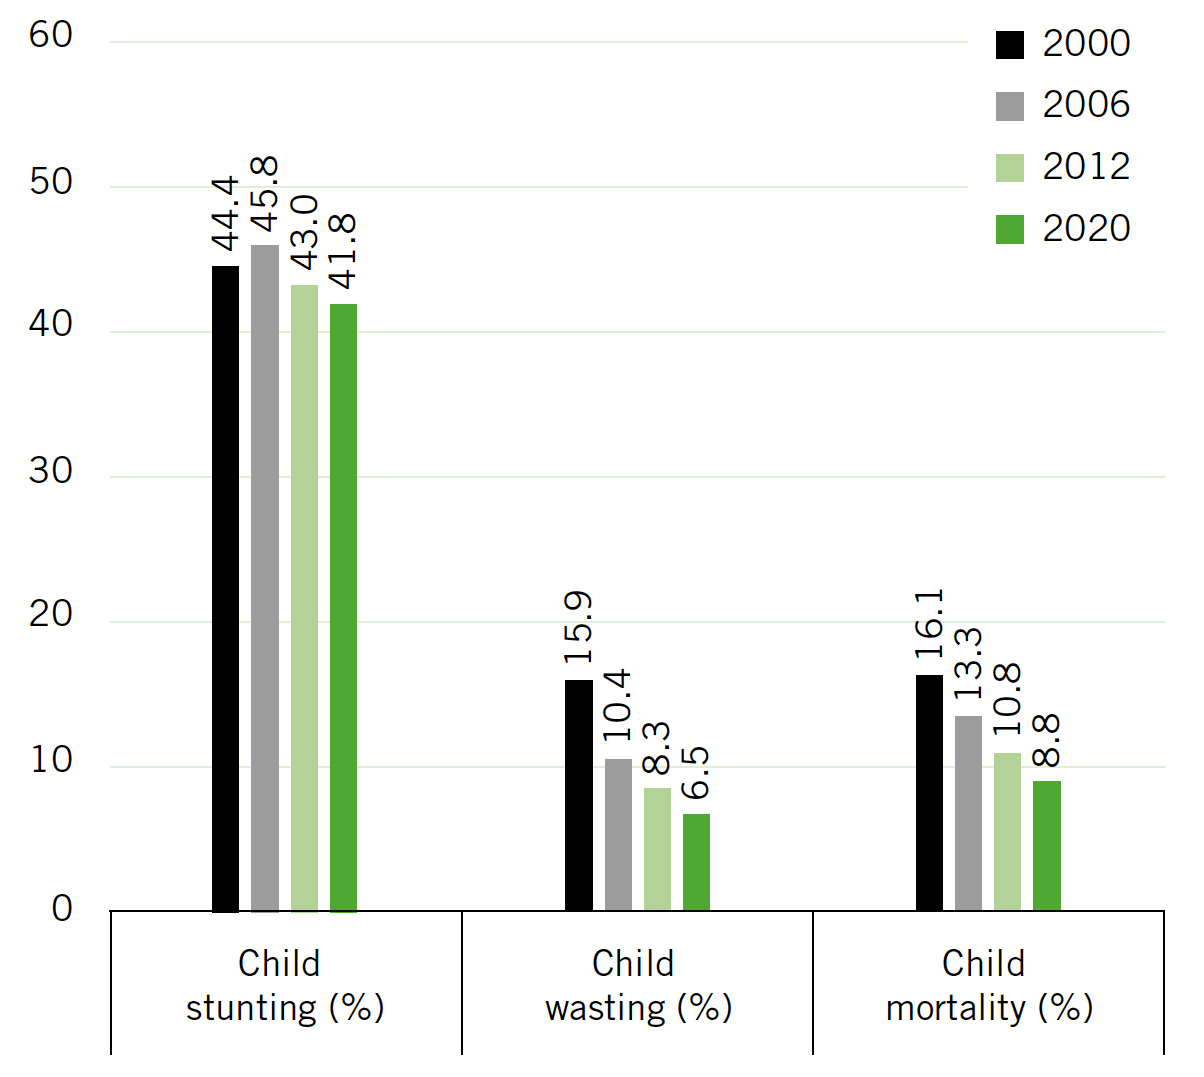 DRC’S GHI INDICATOR VALUES, 2000, 2006, 2012, AND 2020